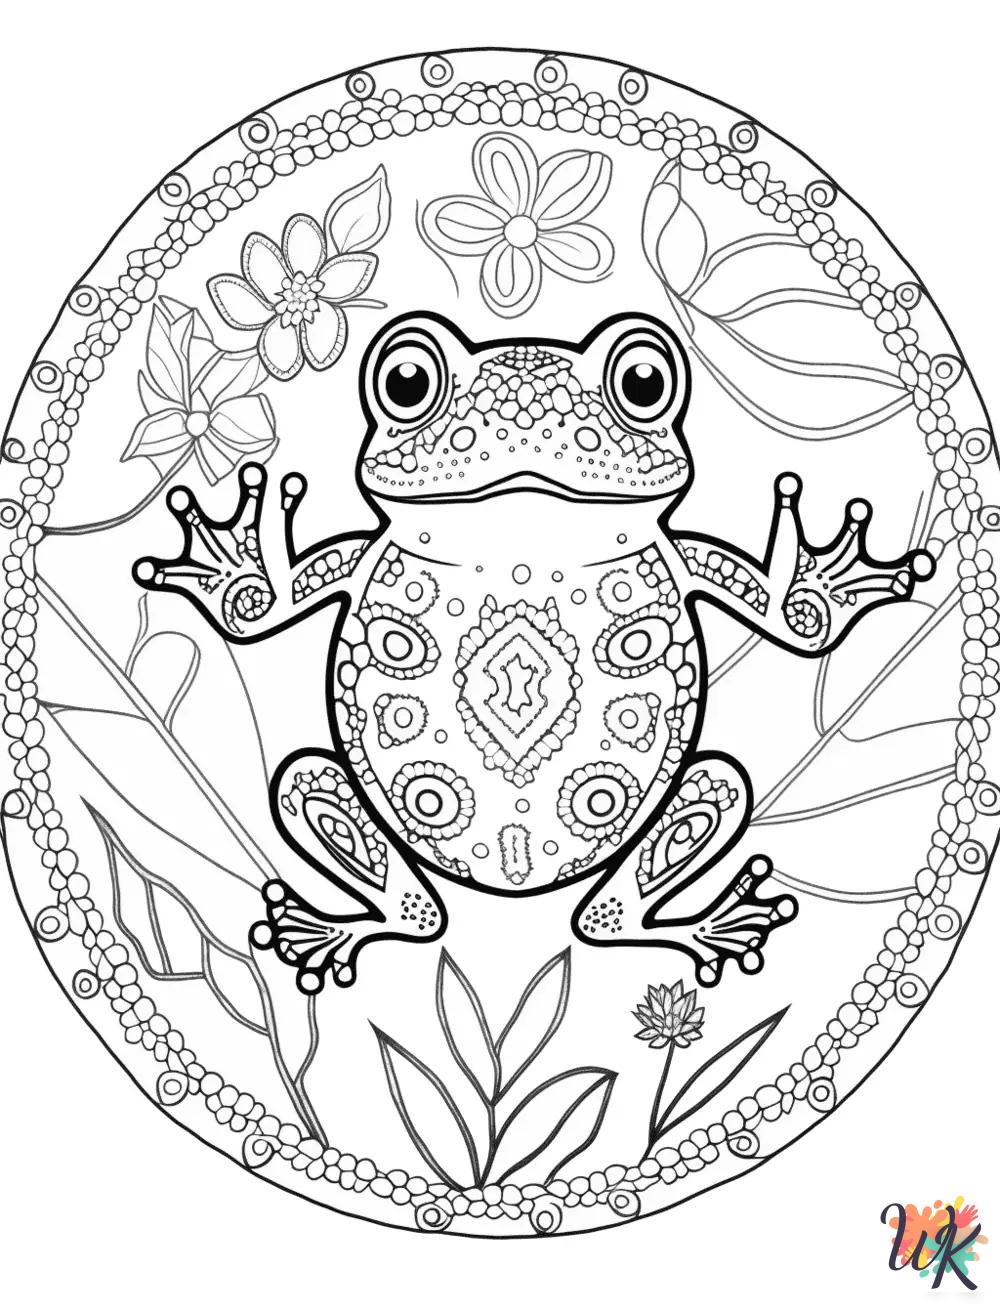 Frog coloring pages easy